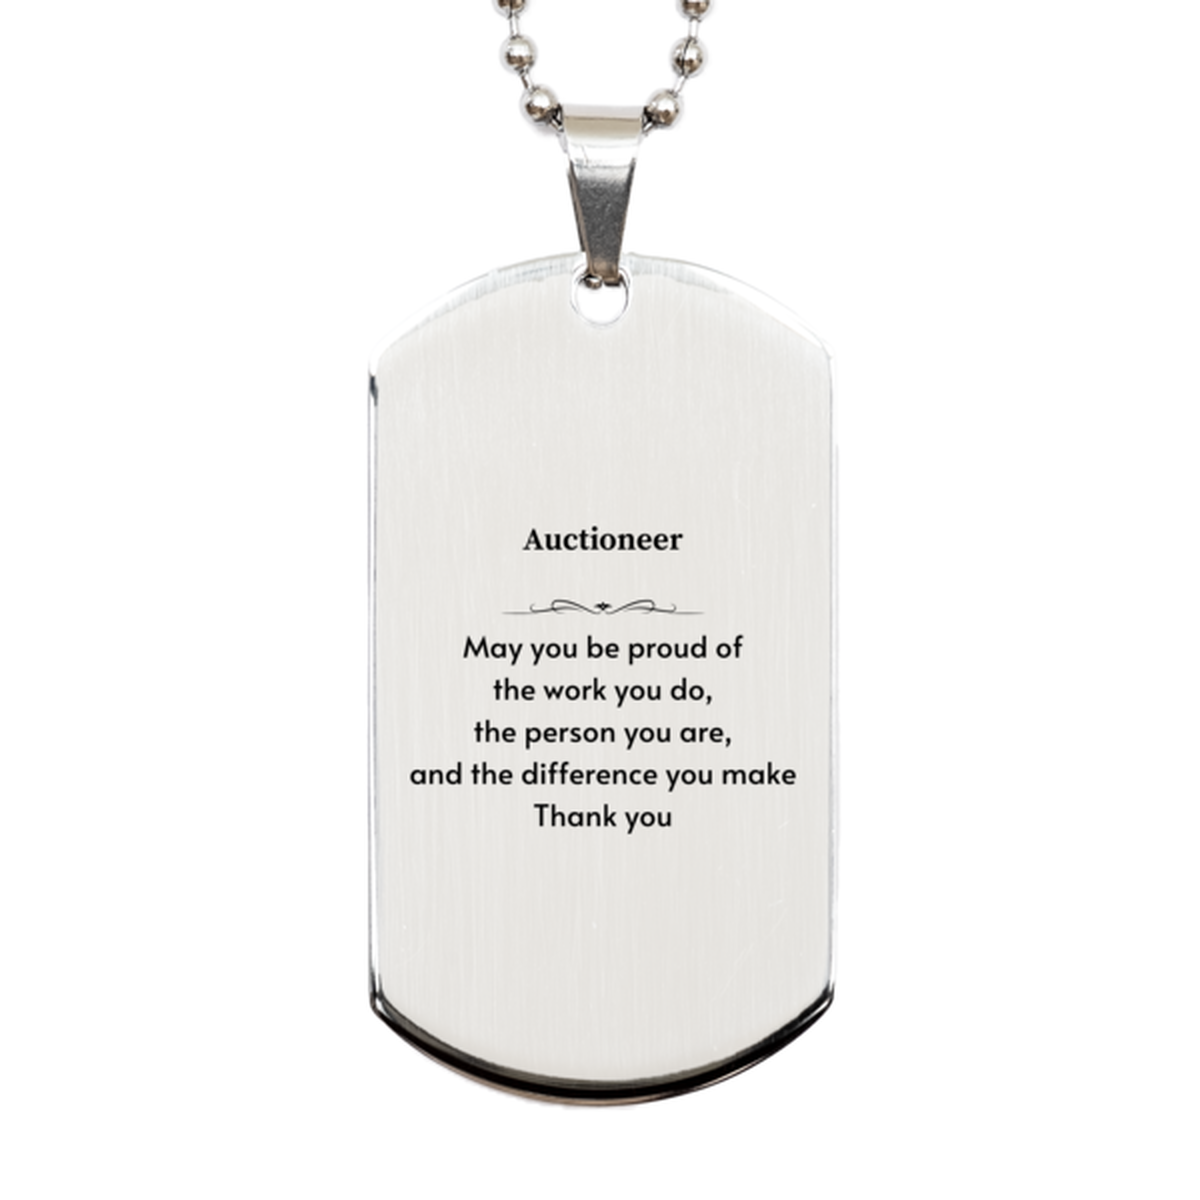 Heartwarming Silver Dog Tag Retirement Coworkers Gifts for Auctioneer, Auctioneer May You be proud of the work you do, the person you are Gifts for Boss Men Women Friends